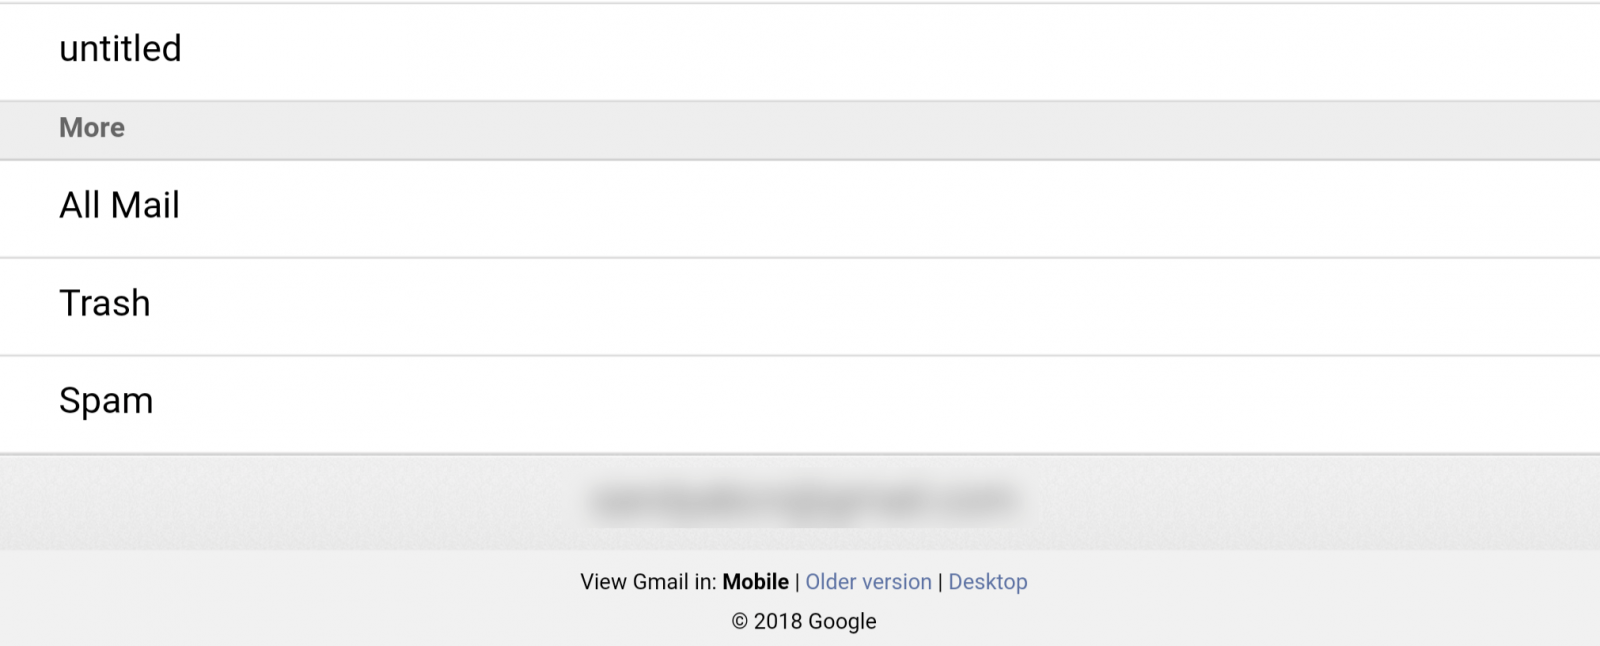 view Gmail in desktop version on mobile